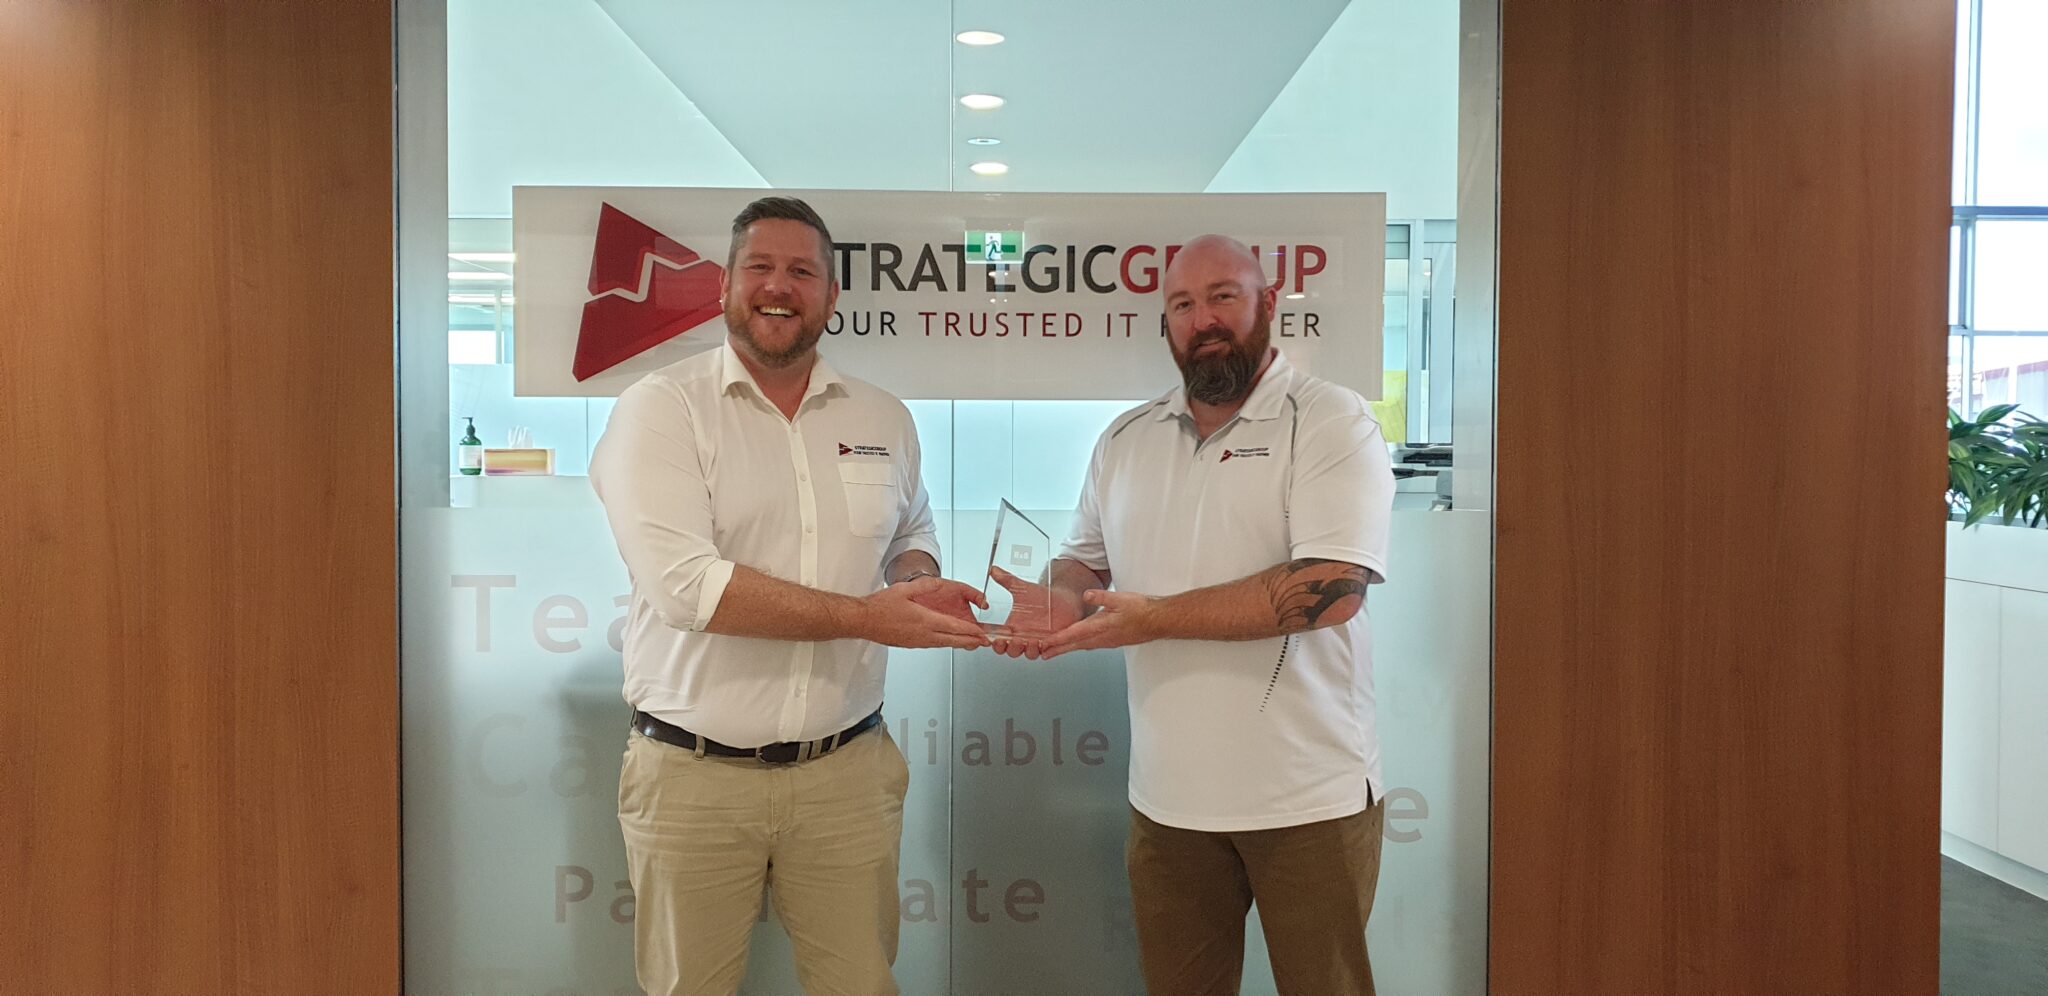 Strategic Group’s Director of Business Development, Aron Robertson with the General Manager of Telecommunications, Adam Fairless, holding their 8x8 Annual Partner Award (left-right).